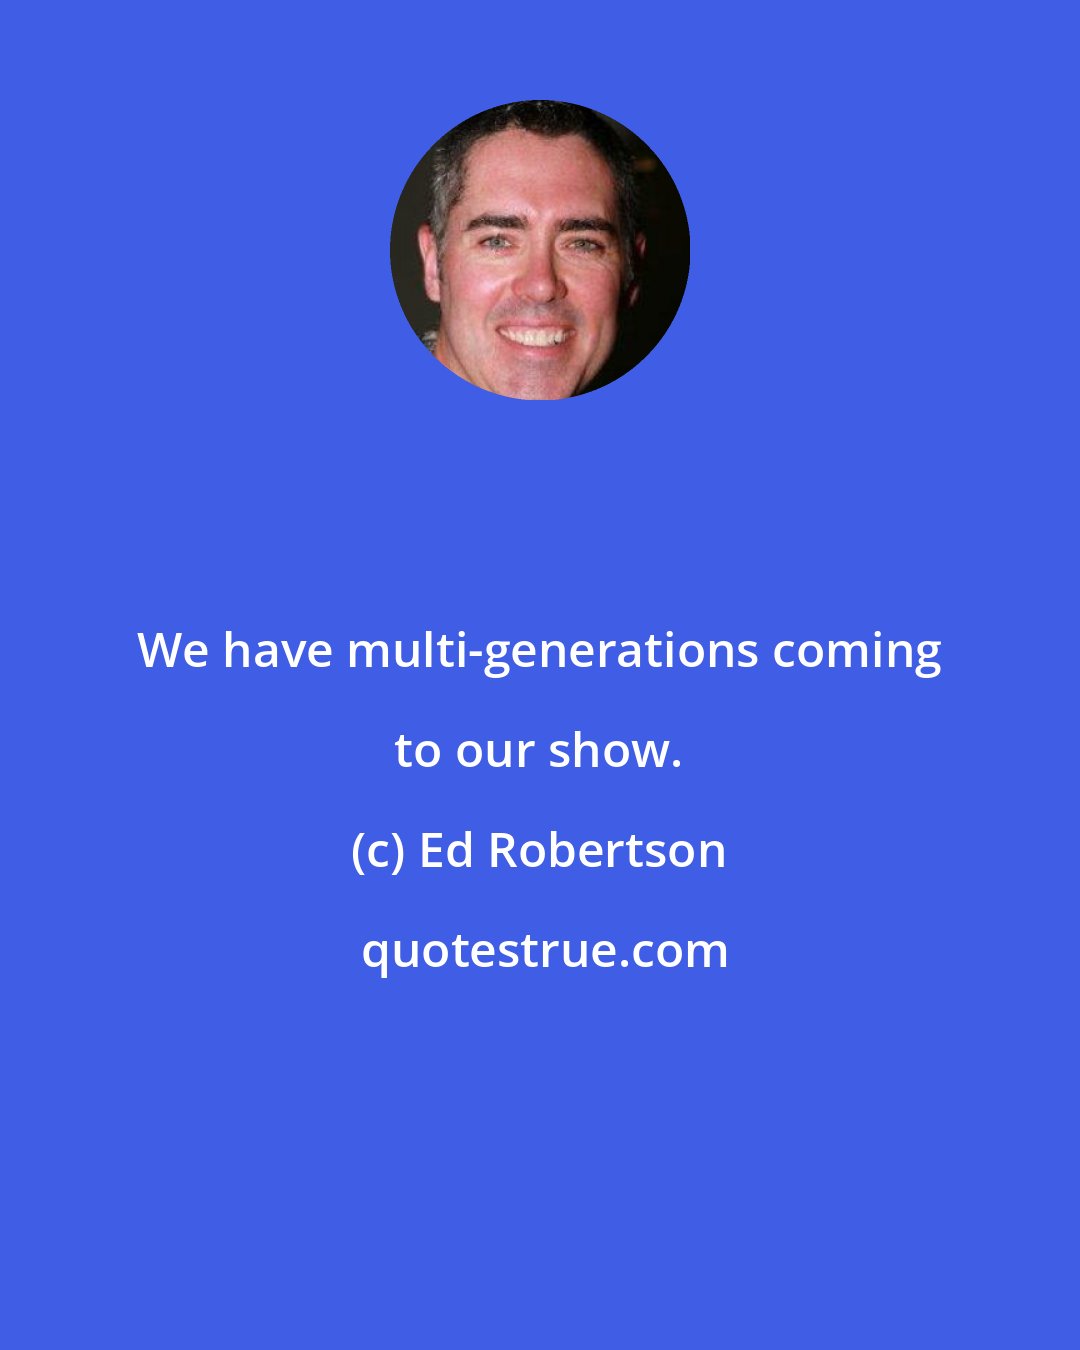 Ed Robertson: We have multi-generations coming to our show.